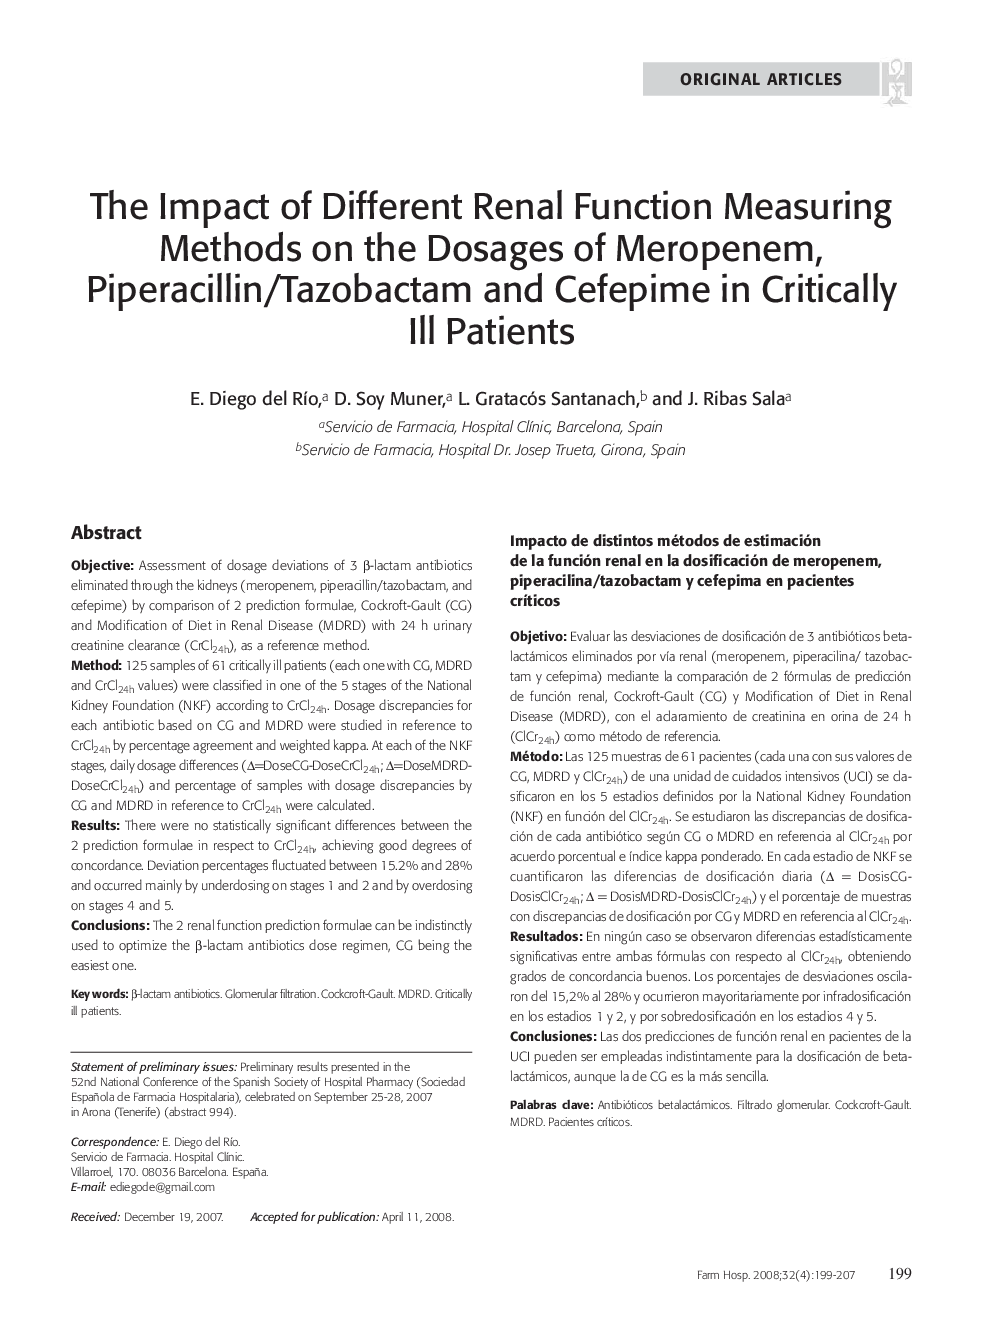 The Impact of Different Renal Function Measuring Methods on the Dosages of Meropenem, Piperacillin/Tazobactam and Cefepime in Critically Ill Patients